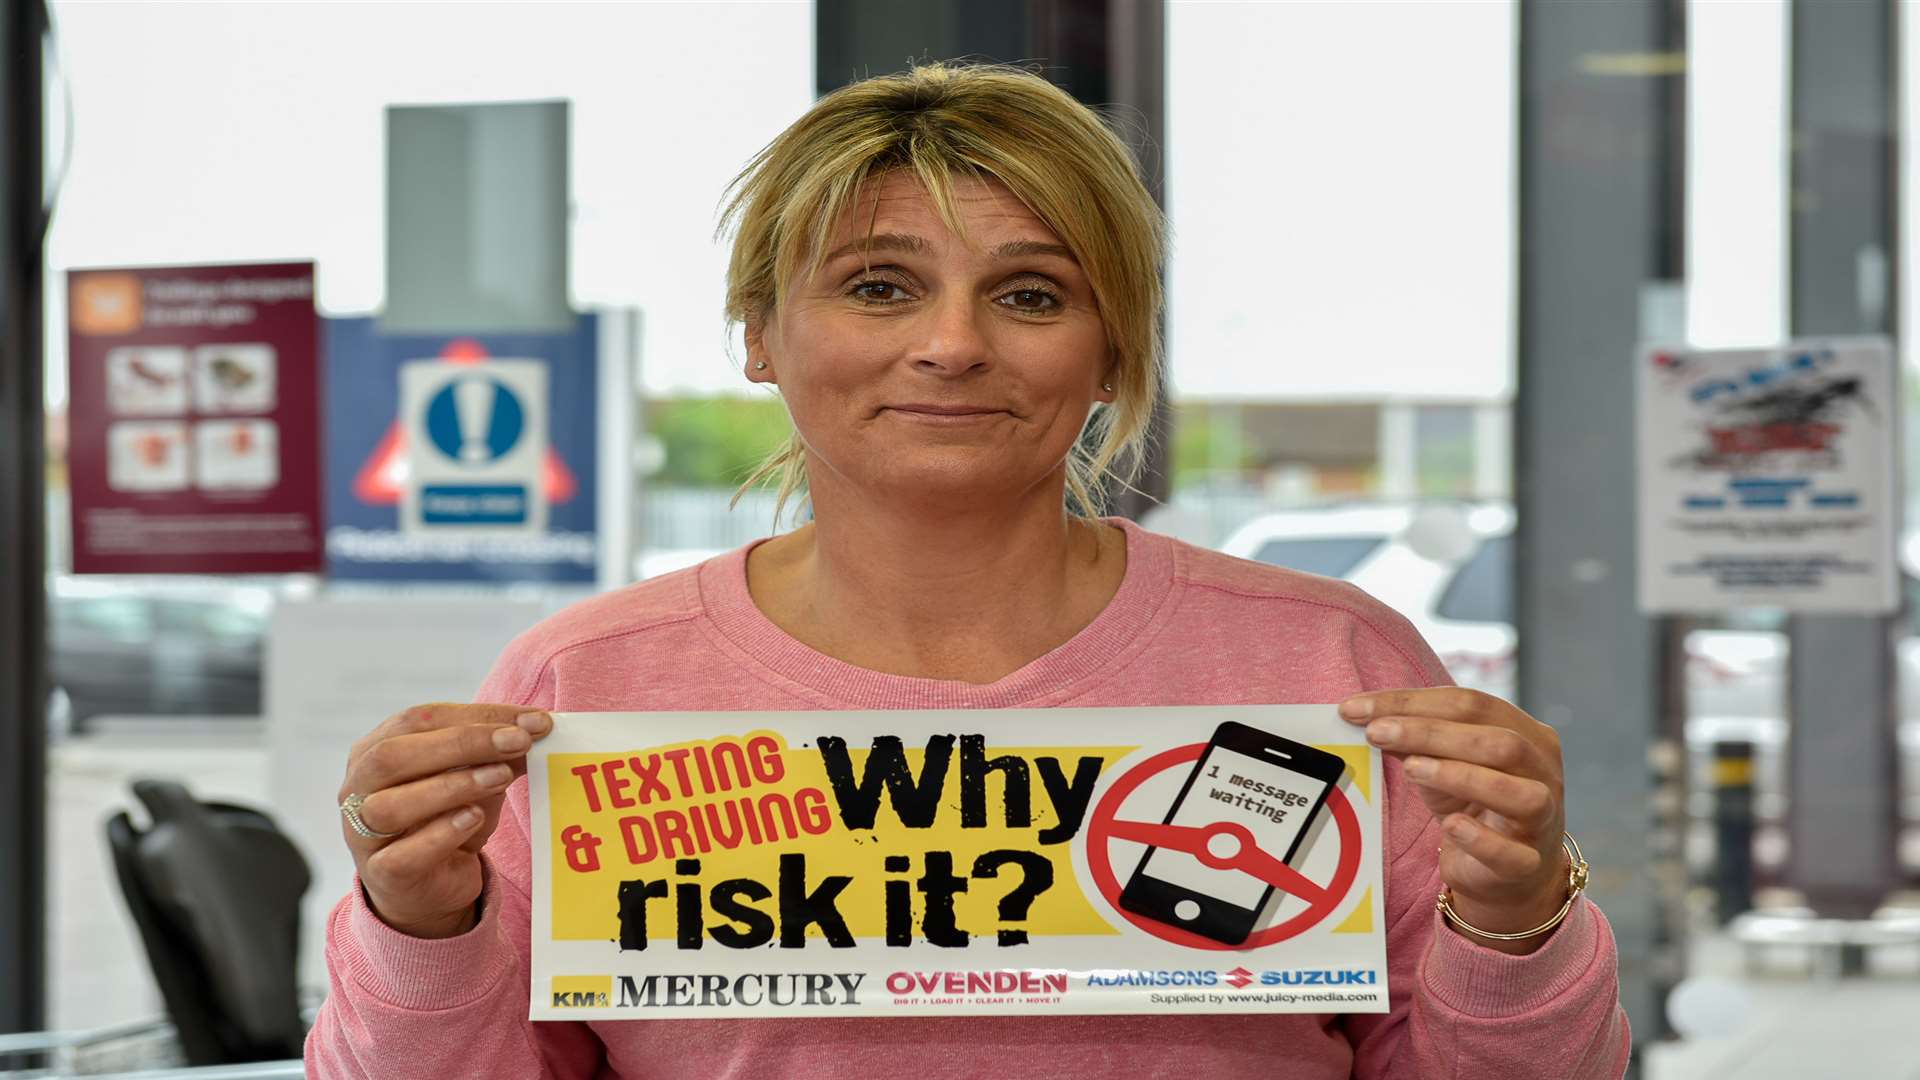 Tracy Squire, Mum of Daniel Squire, a teenage cyclist who was killed after being knocked off his bike, gave out Why Risk It? stickers against texting while driving